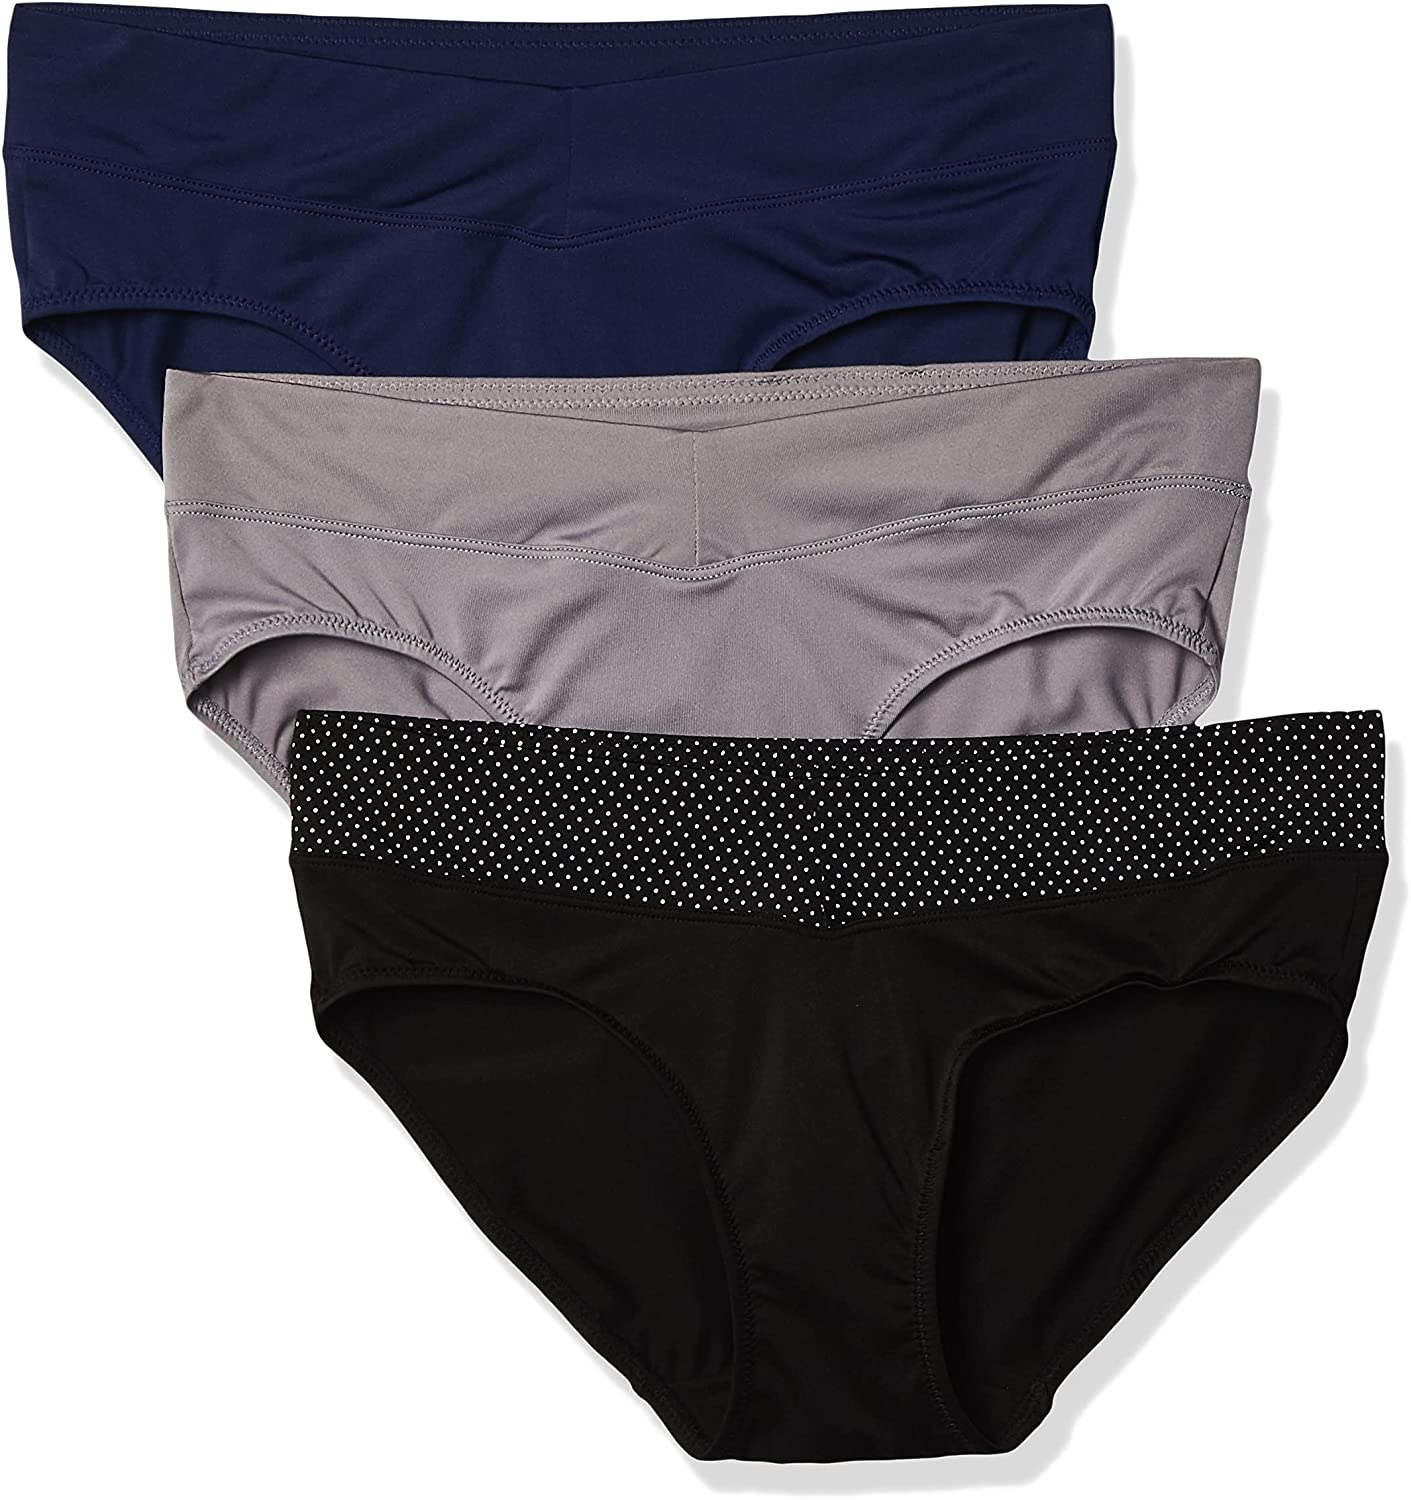 Warner's Women's Blissful Benefits No Muffin Top 3 Pack Hipster Panties